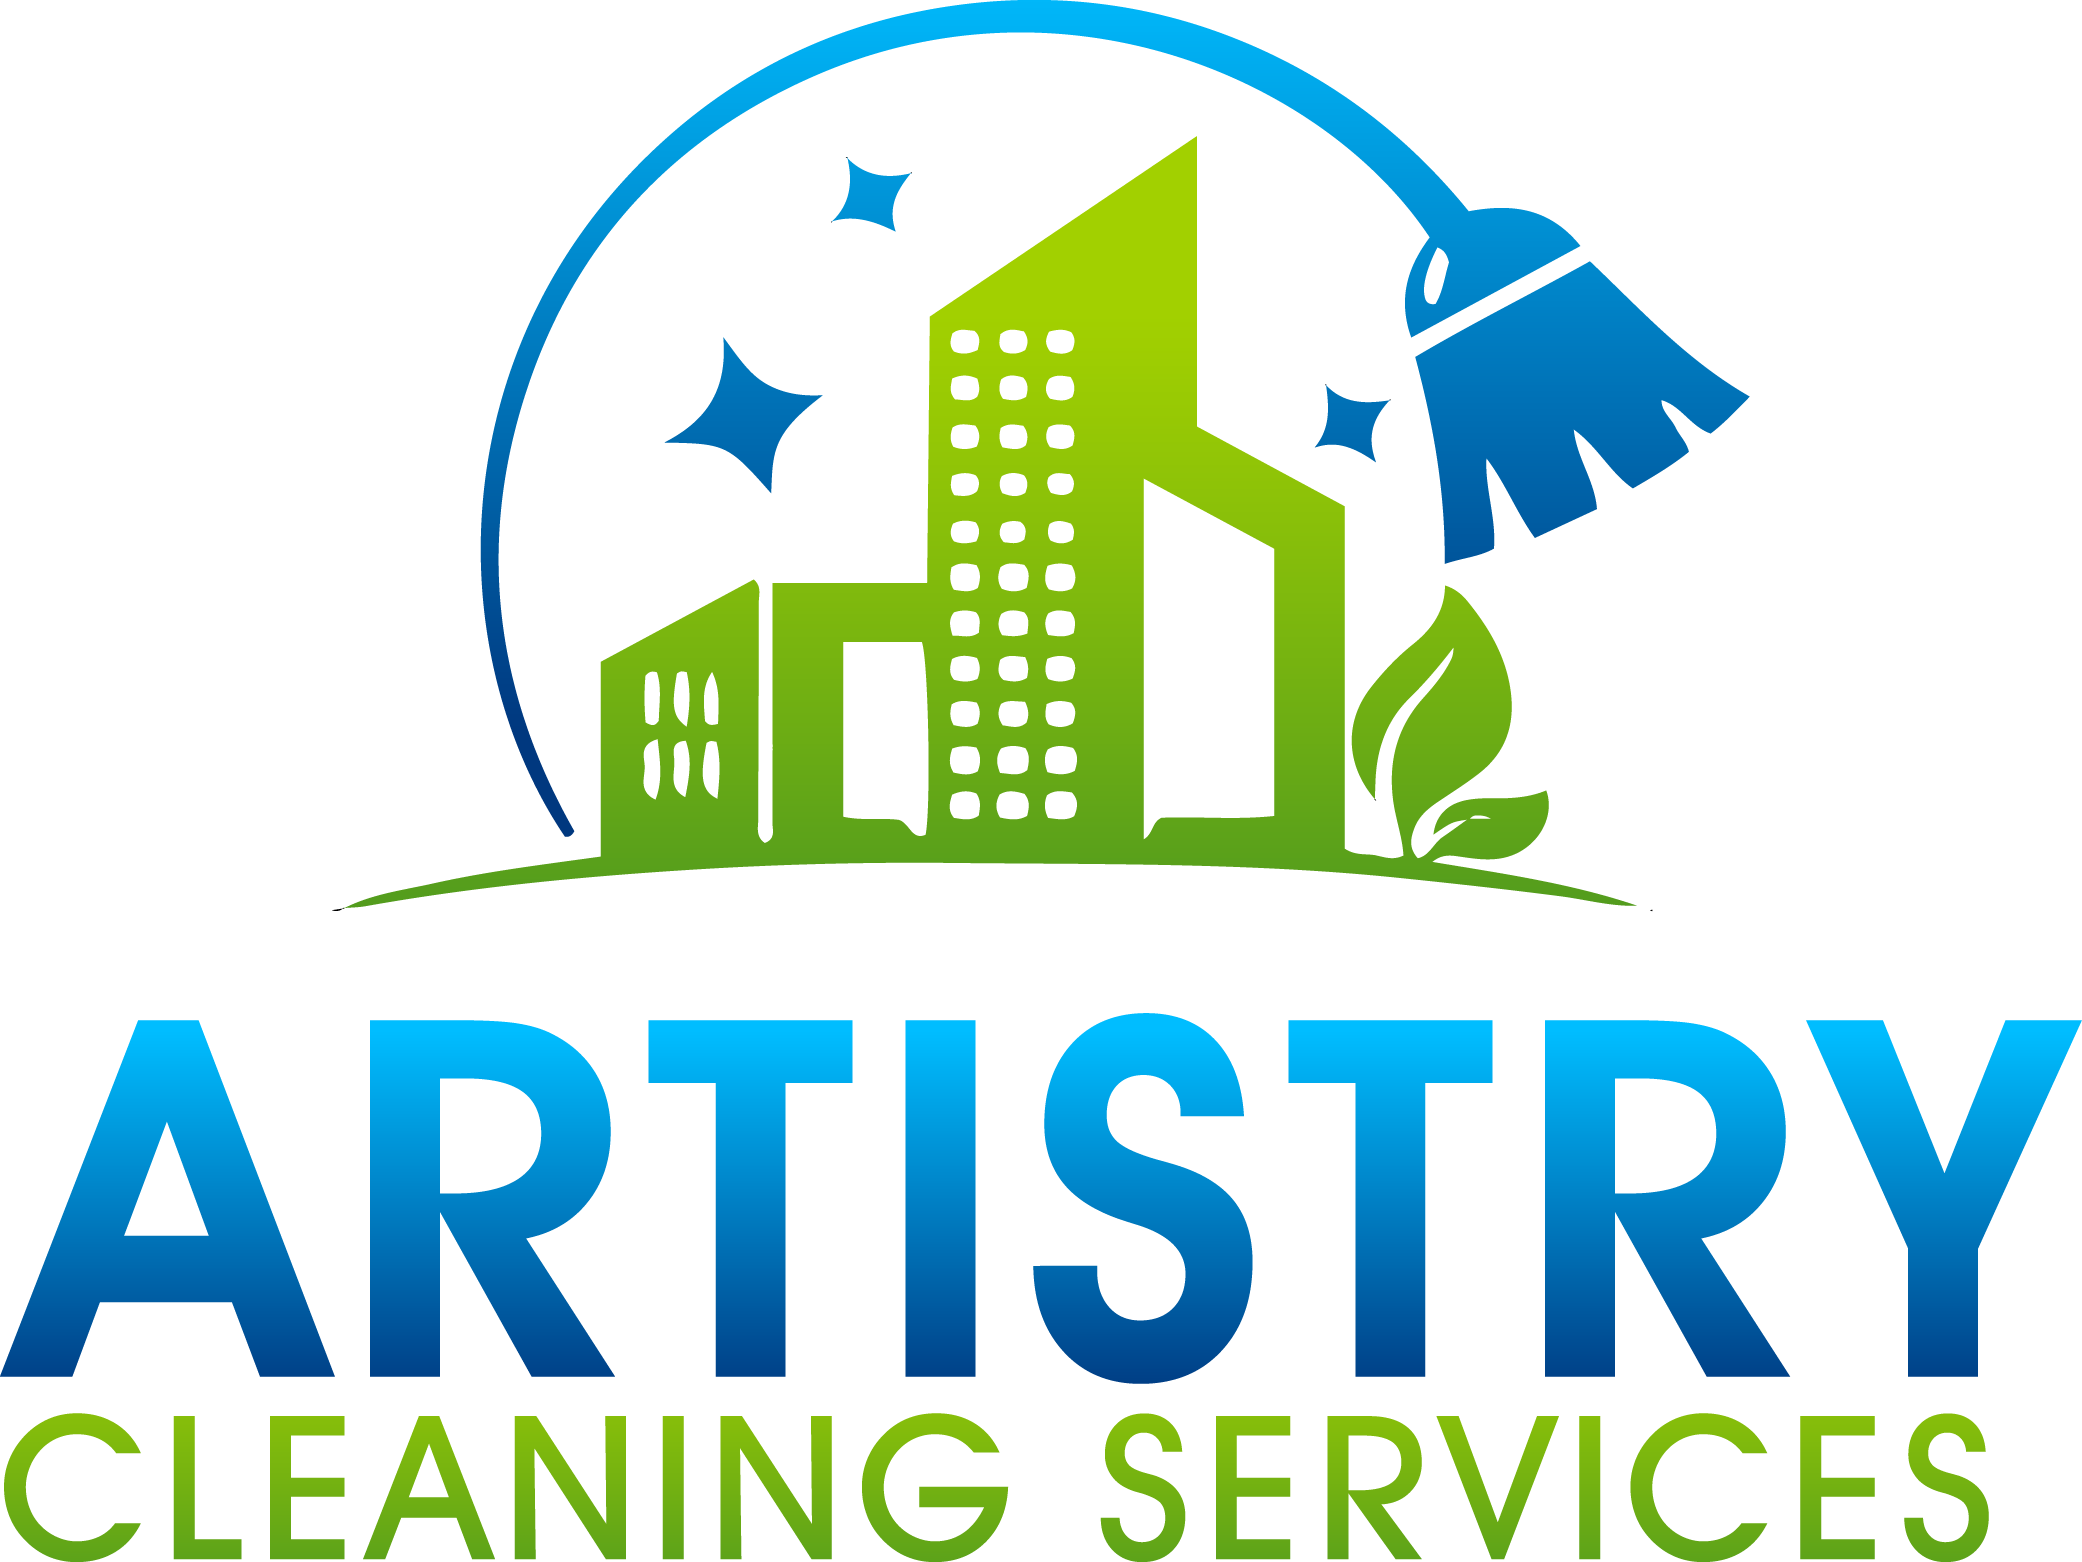 Artistry cleaning services